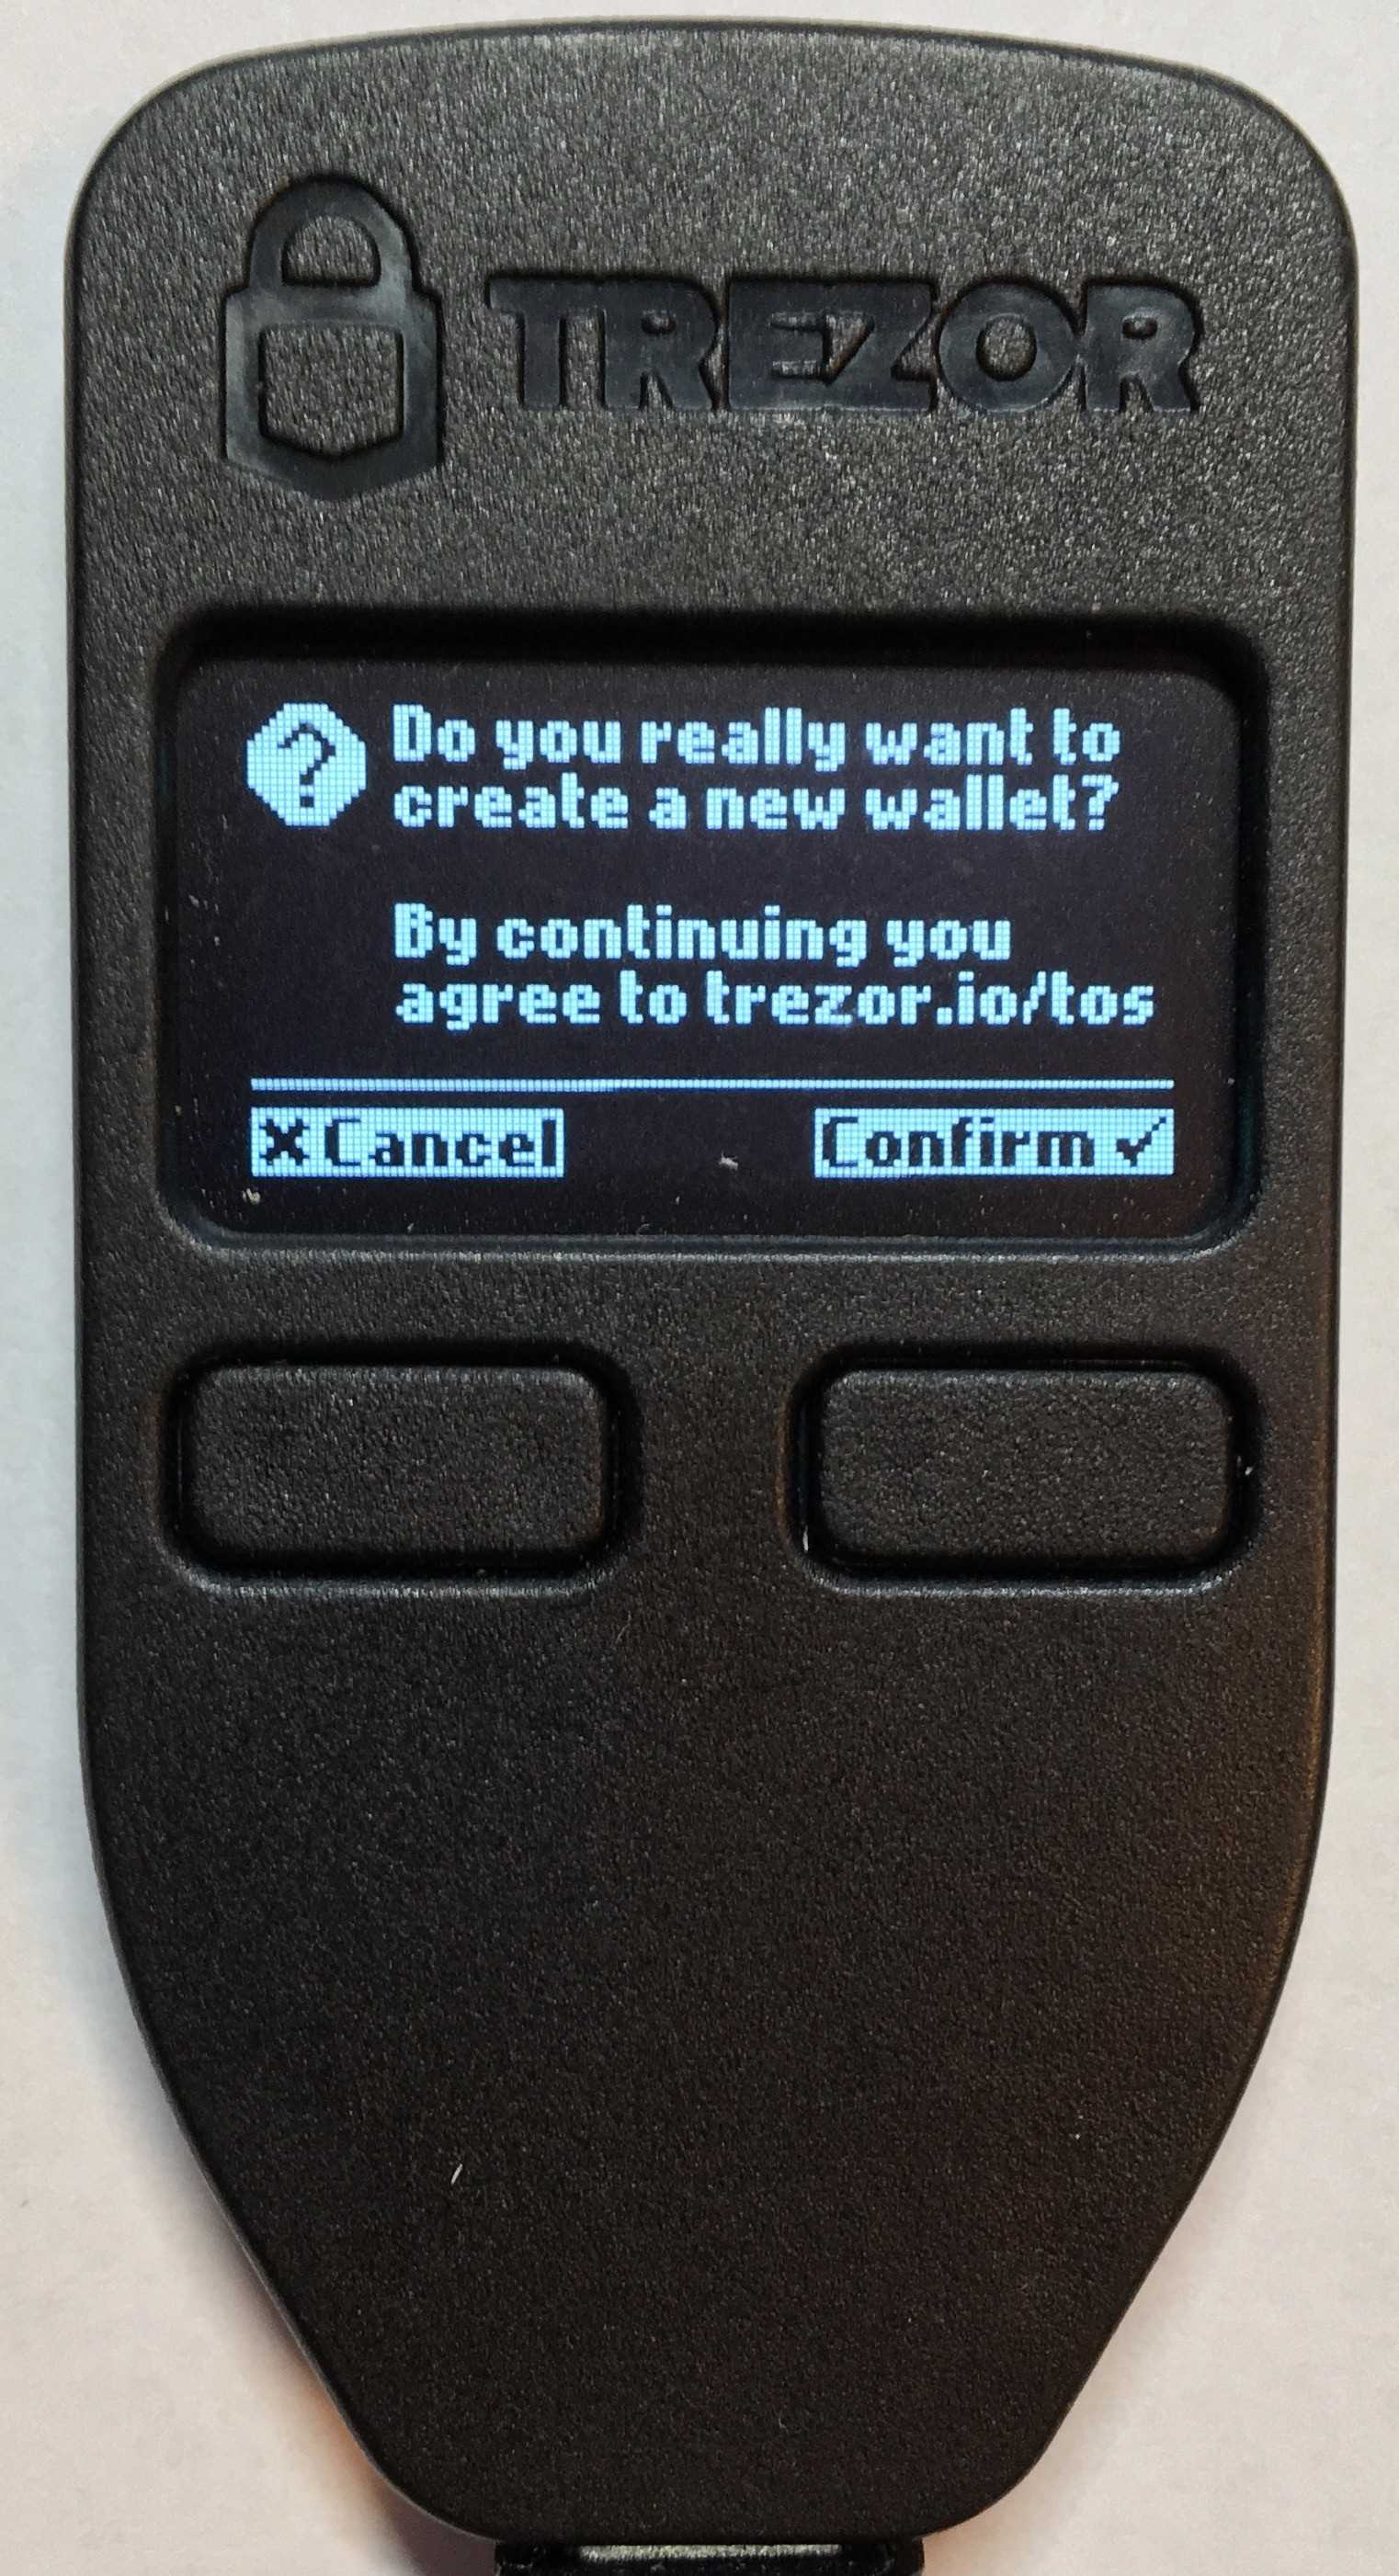 Latest updates and features of Trezor hardware wallet